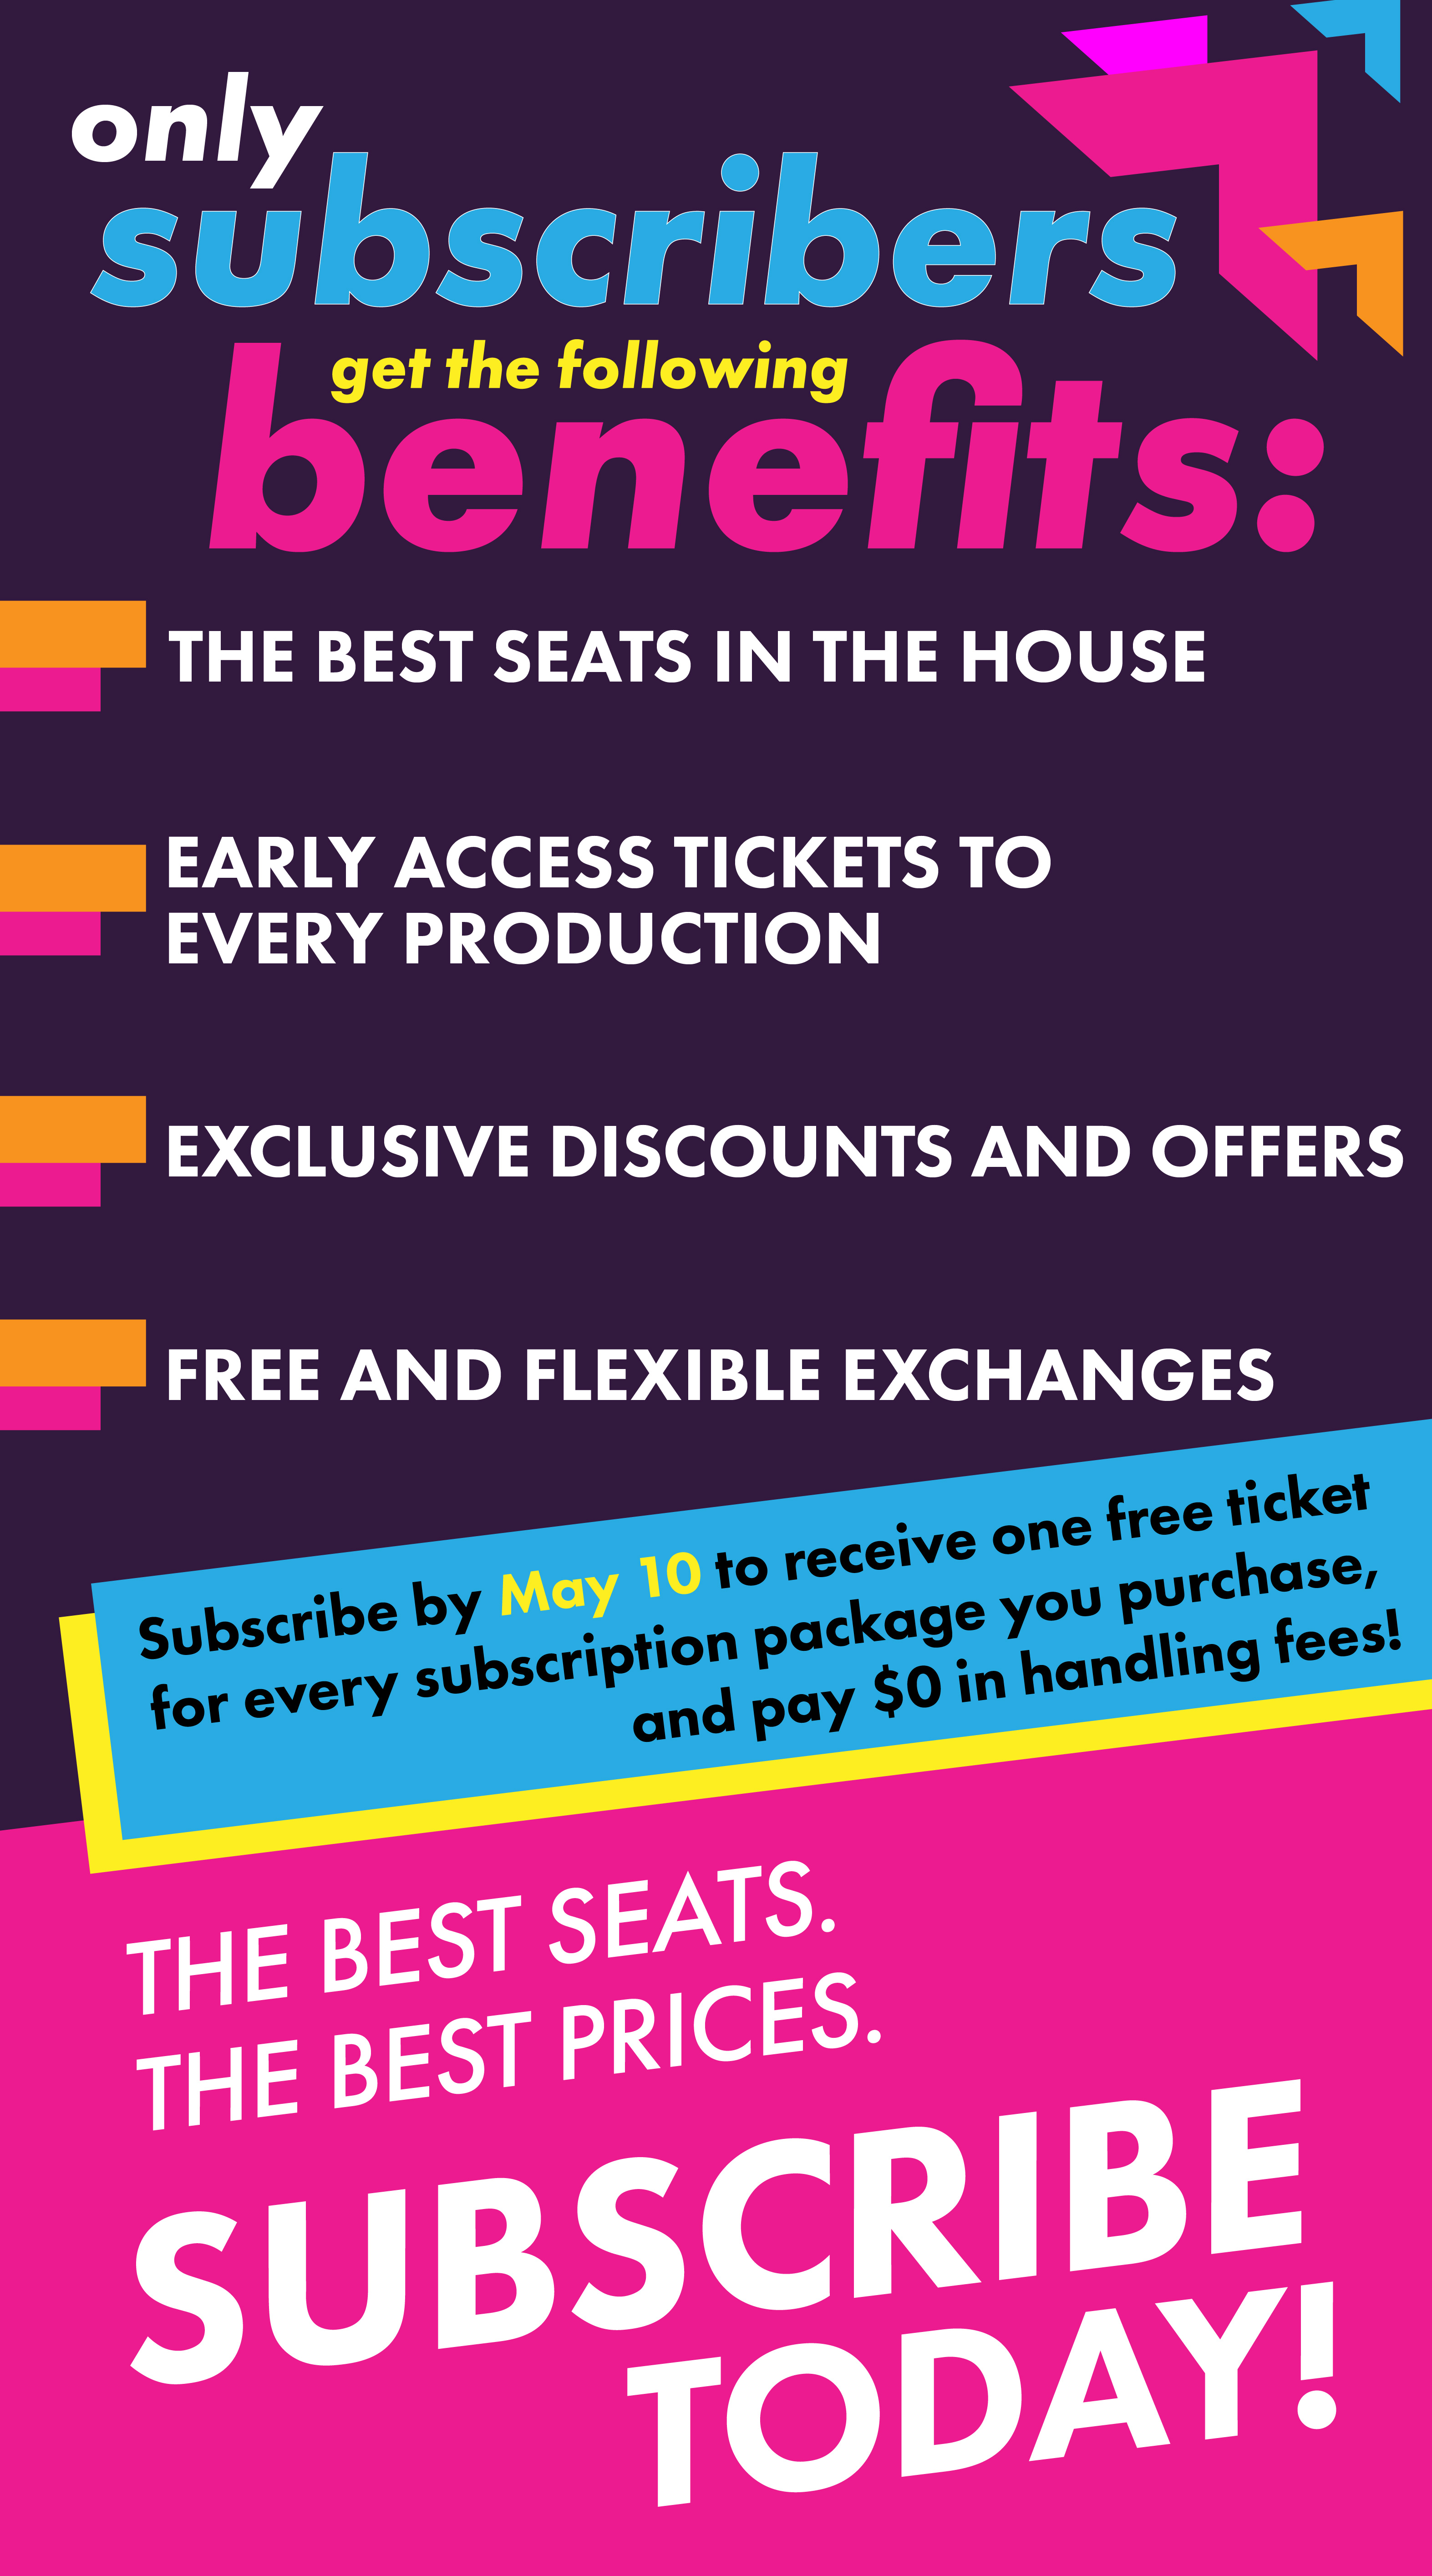 Only subscribers get the following benefits: The Best Seats in the House. Early Access Tickets to Every Production. Exclusive Discounts and Offers. Free and Flexible Exchanges. Subscribe by May 10 to receive one free ticket for every subscription package you purchase, and pay $0 in handling fees!